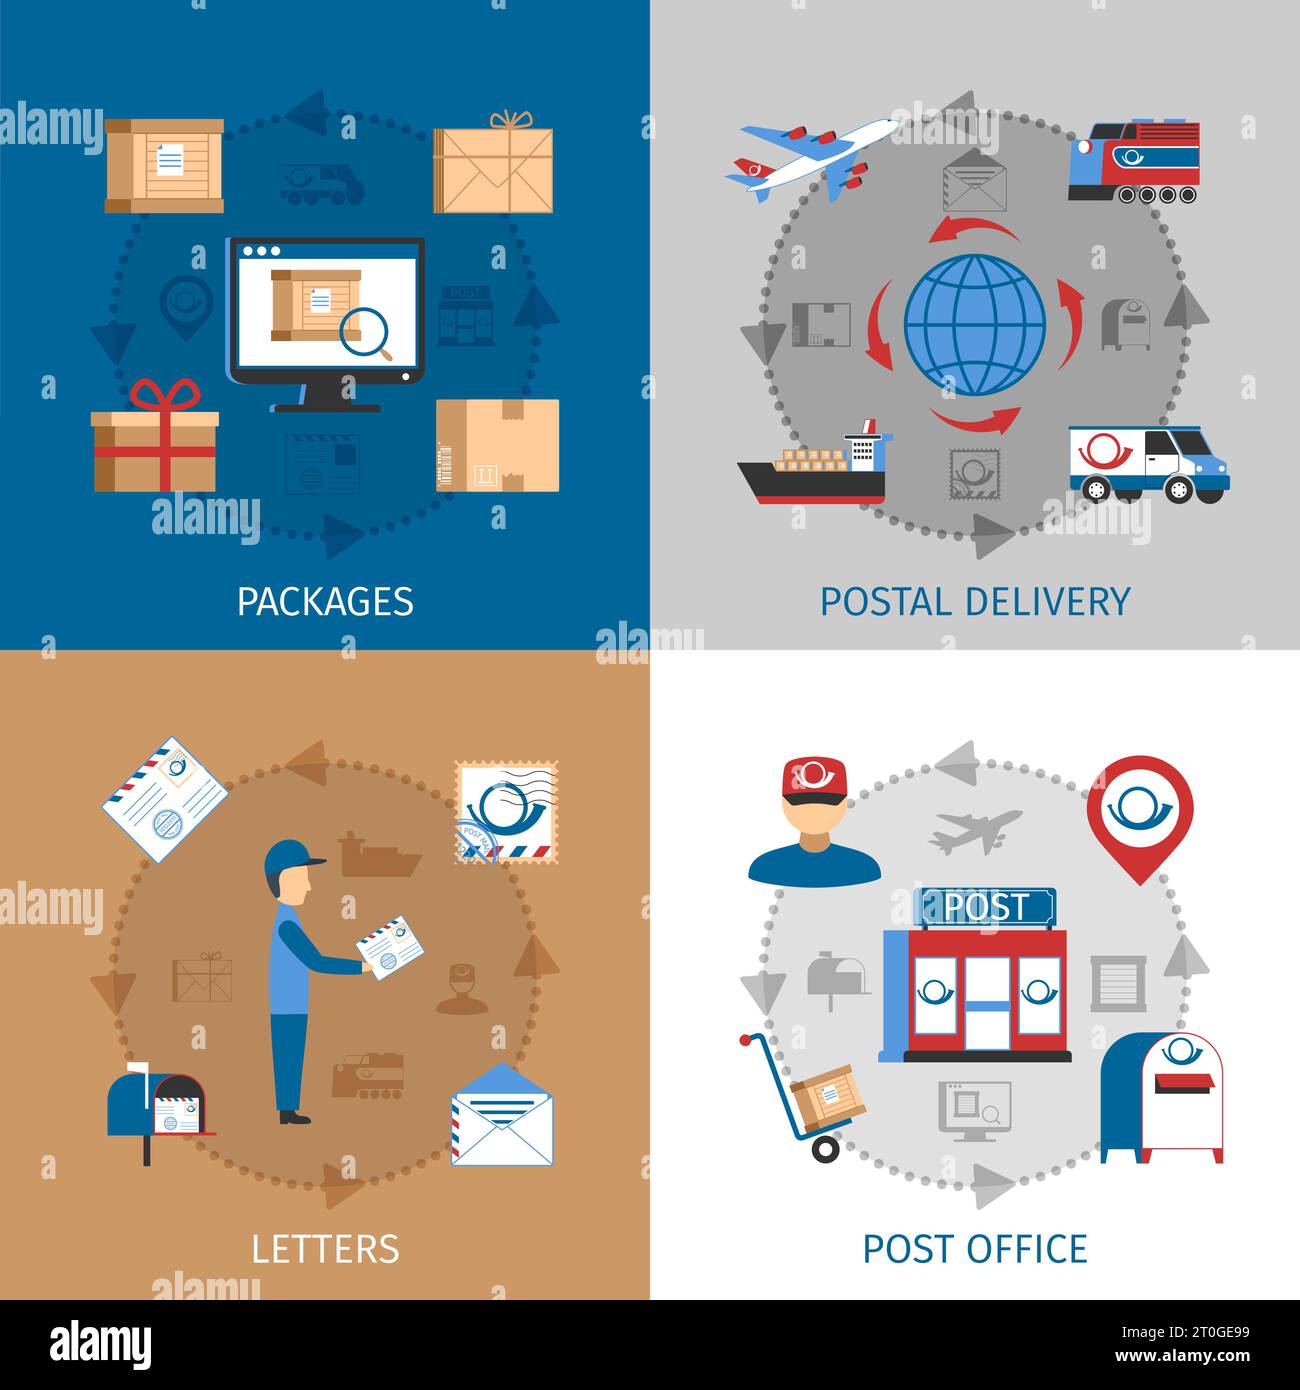 Mail concept icons set with packages post office and letters symbols flat isolated vector illustration Stock Vector